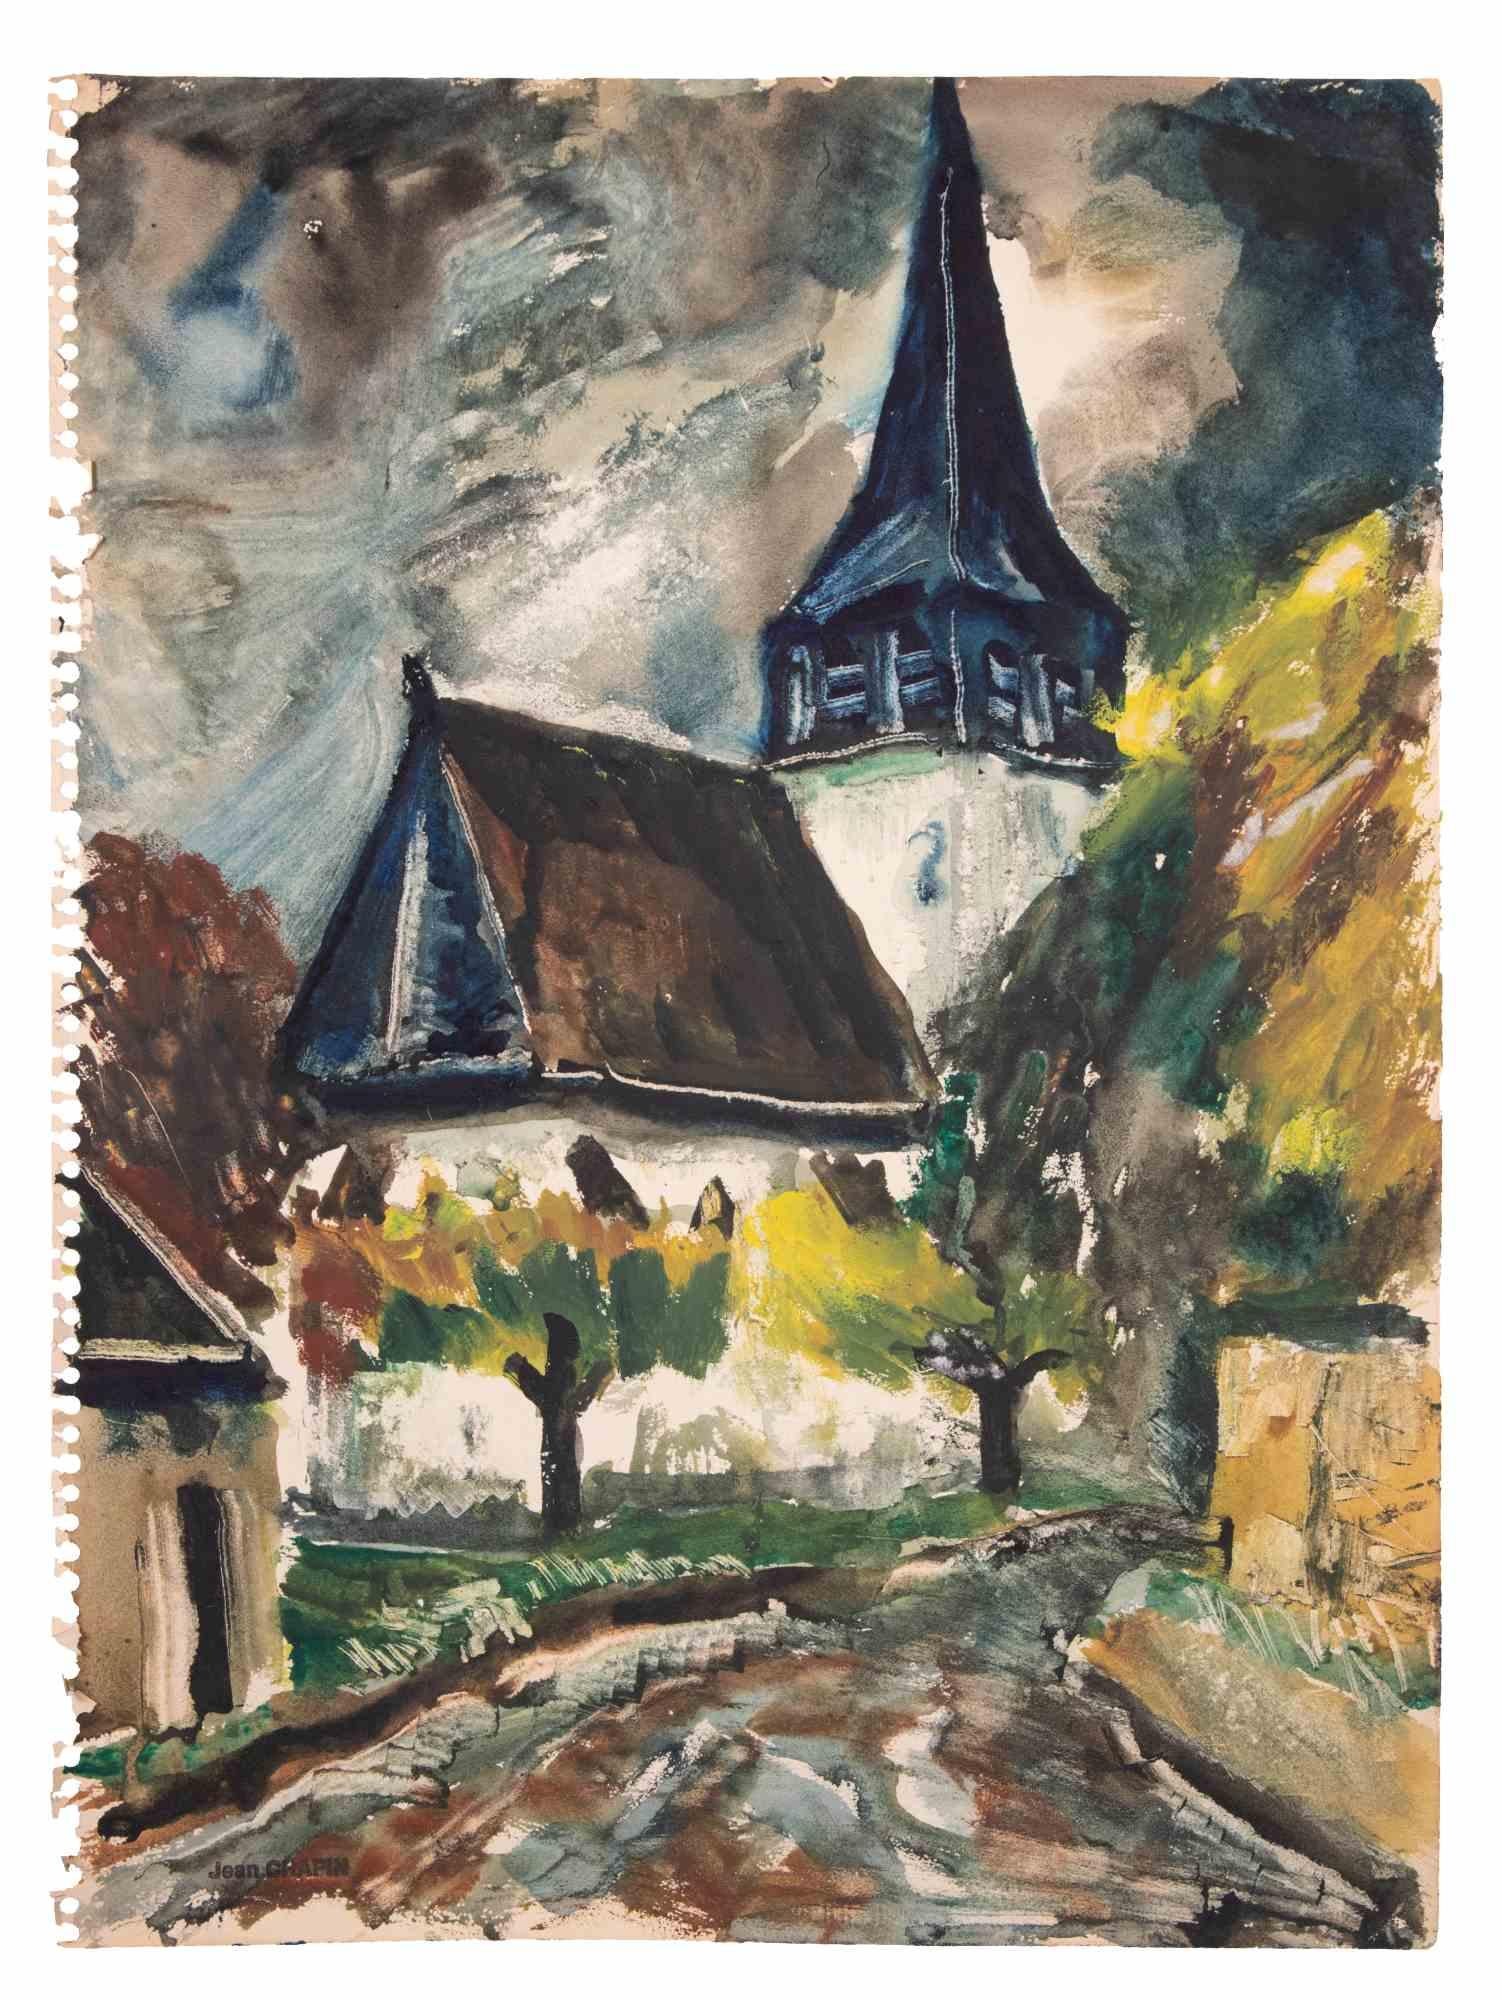 Country House  is an ink and watercolor drawing realized by Jean Chapin  in the mid-20th century.

Signature stamp on the lower left margin. 

Good conditions.

Jean Chapin is a French painter and lithographer born on 21 February 1896 in Paris and